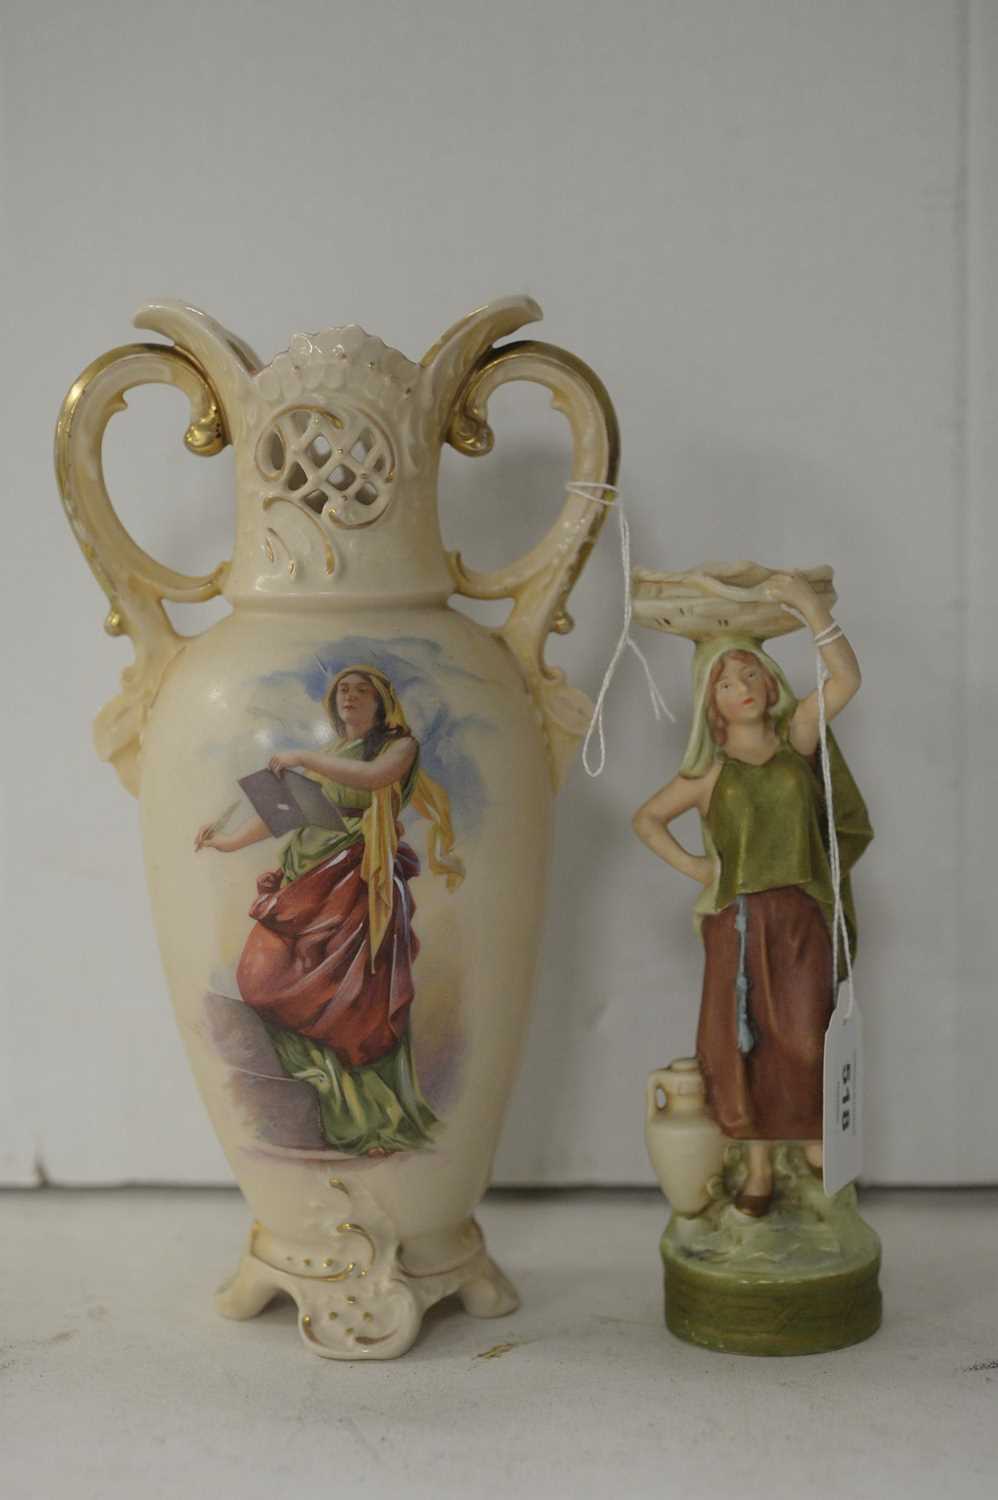 Lot 500 - A Royal Dux vase and small figure